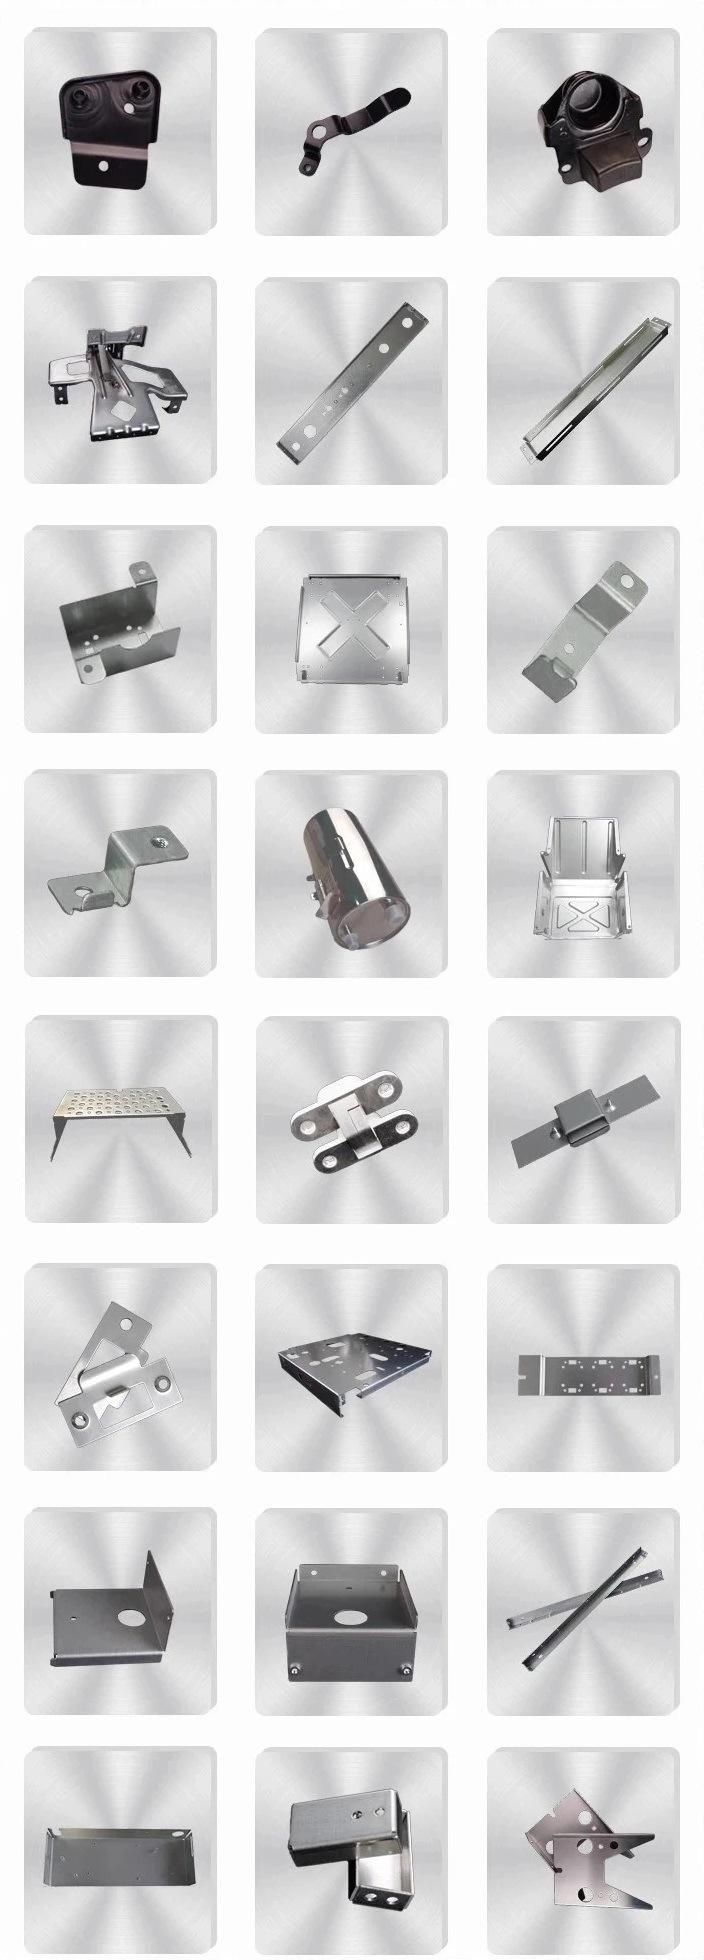 OEM CNC Machined Precision Turned Parts